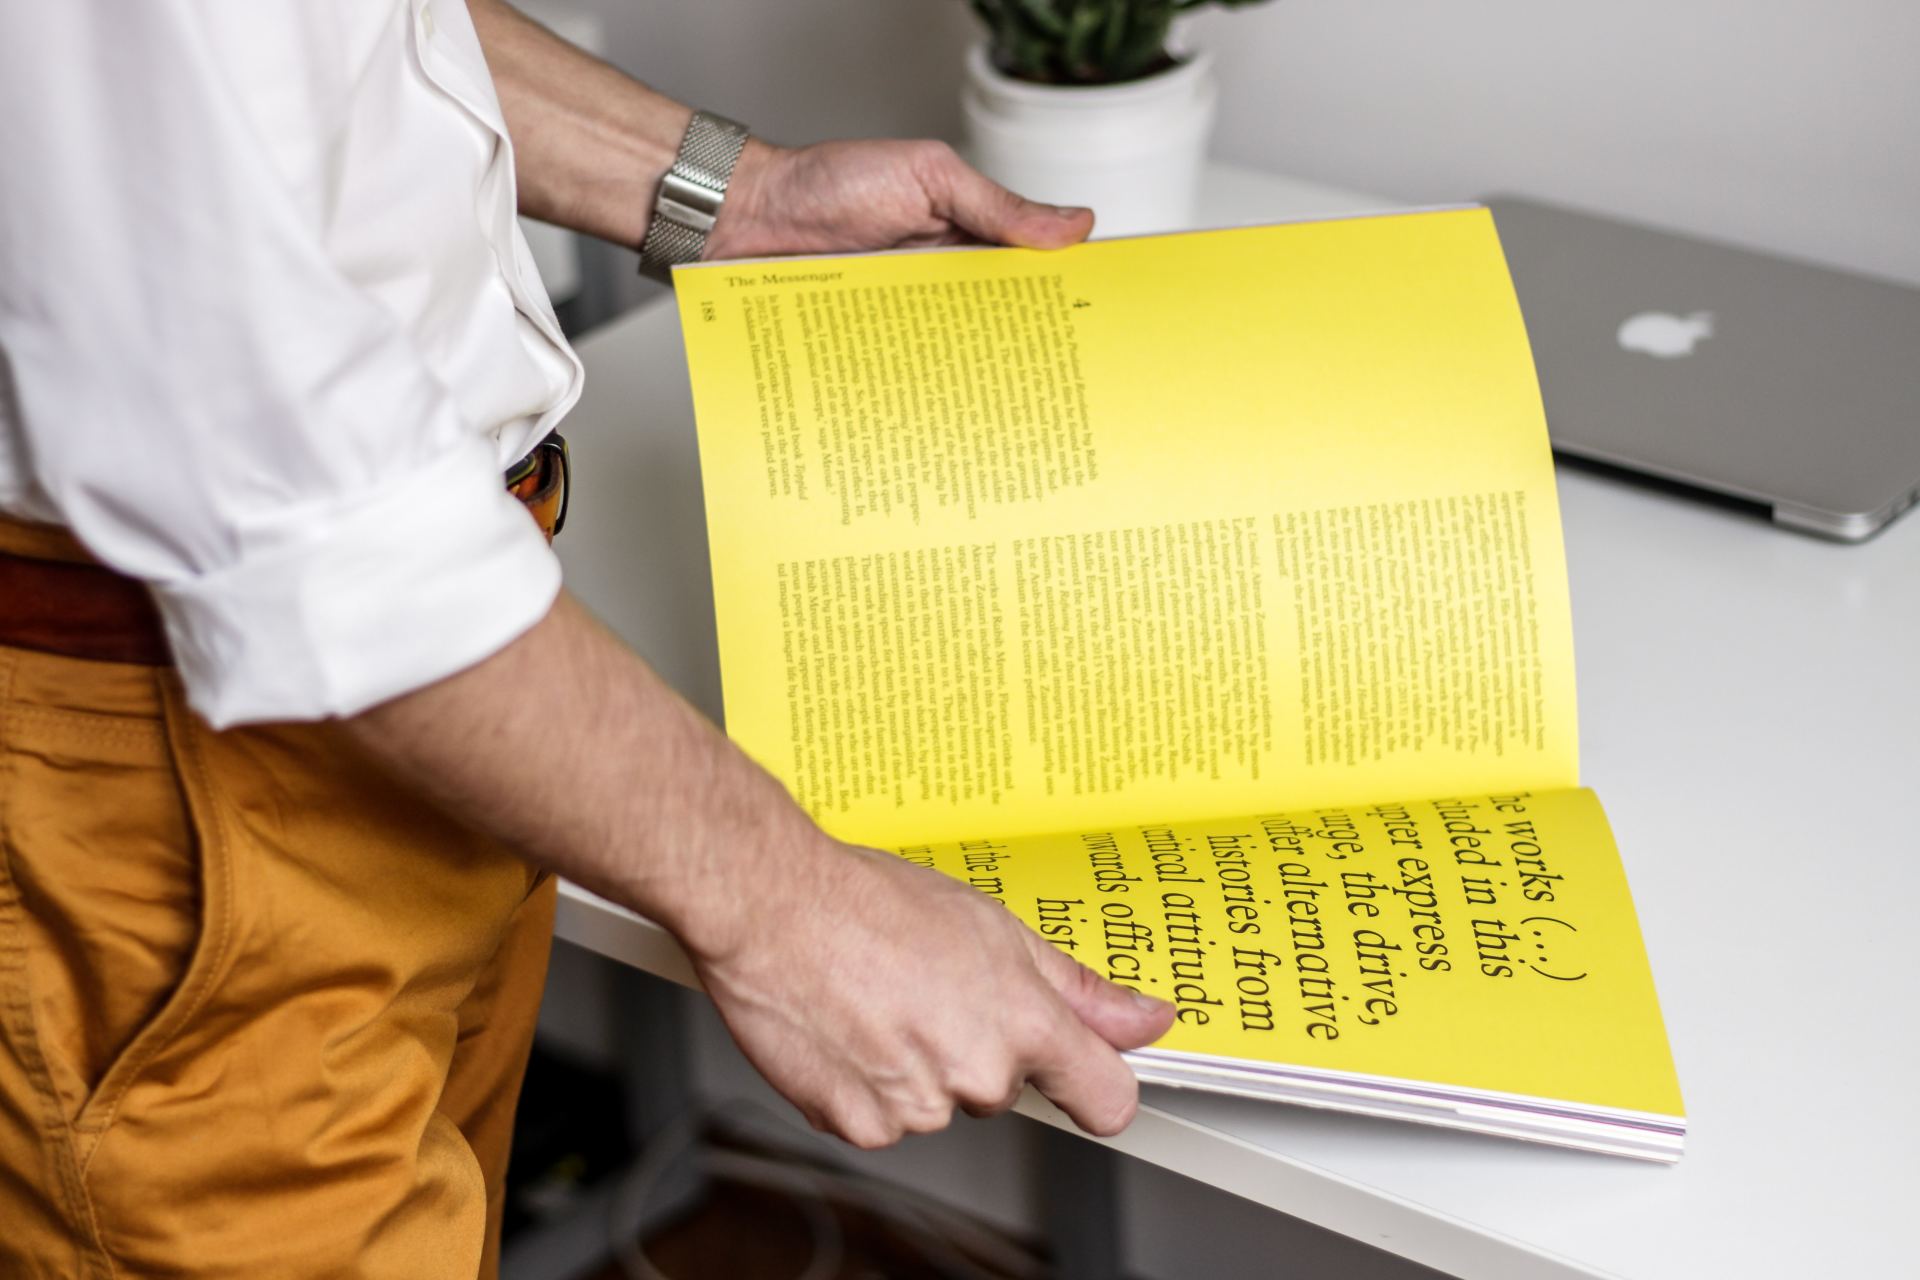 Man opening magazine at double spread page filled with type